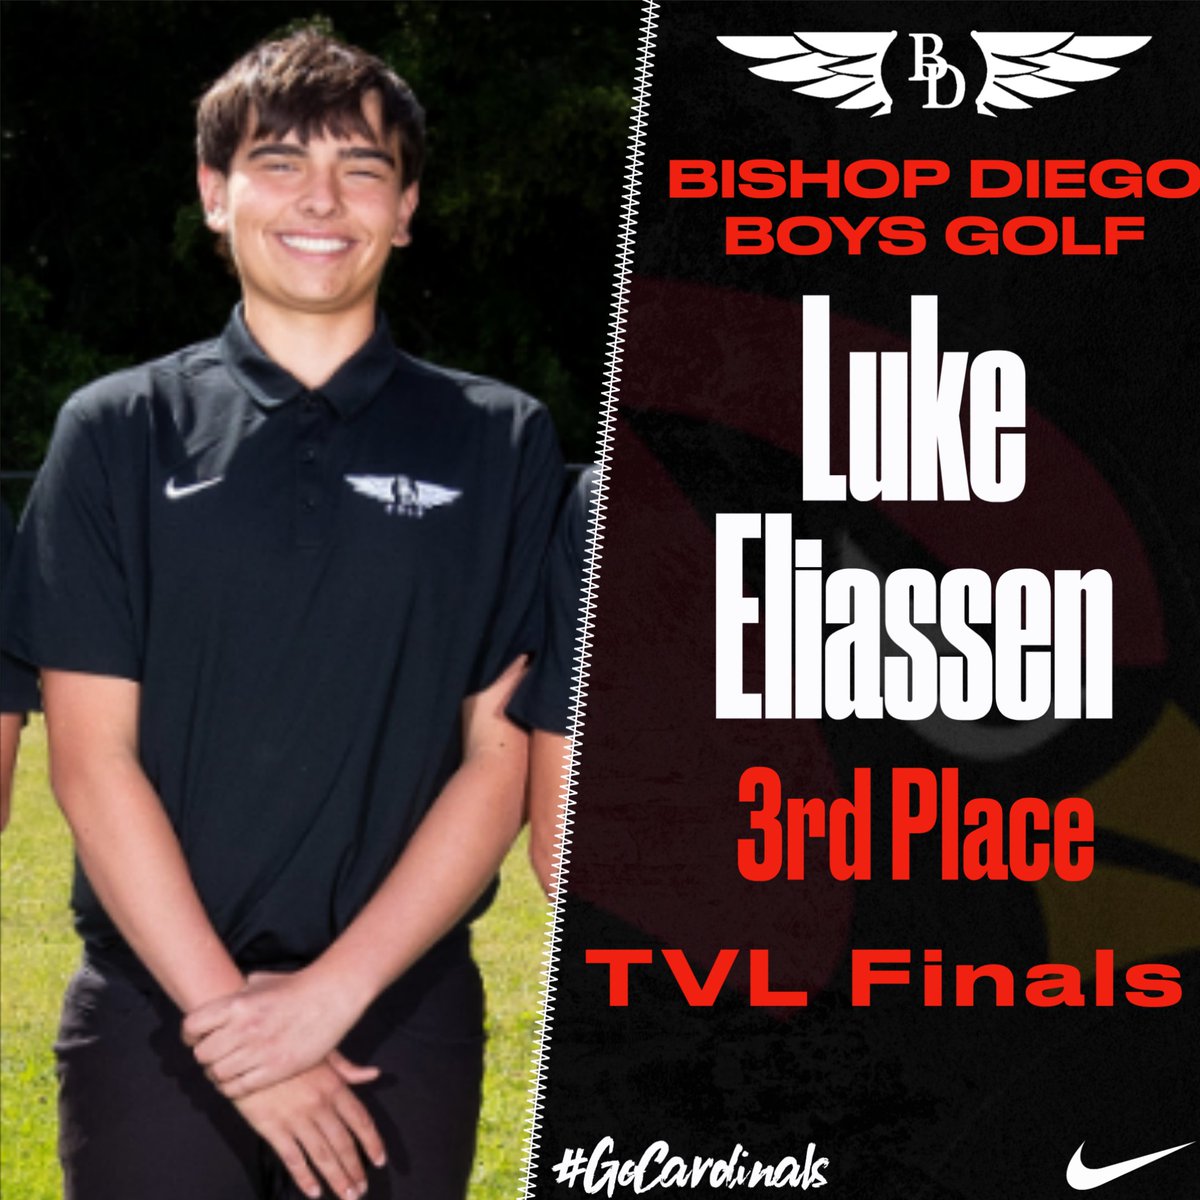 👏Congratulations to Sophomore Luke Eliassen for his 3rd place finish in Tri-Valley League Finals and qualifying for CIF scoring a season low 79 (Day 1: 40, Day 2: 39)🏌️Next week is CIF-SS Individual Regionals and May 13 is CIF-SS Division 6 Team Championships

#GoCardinals